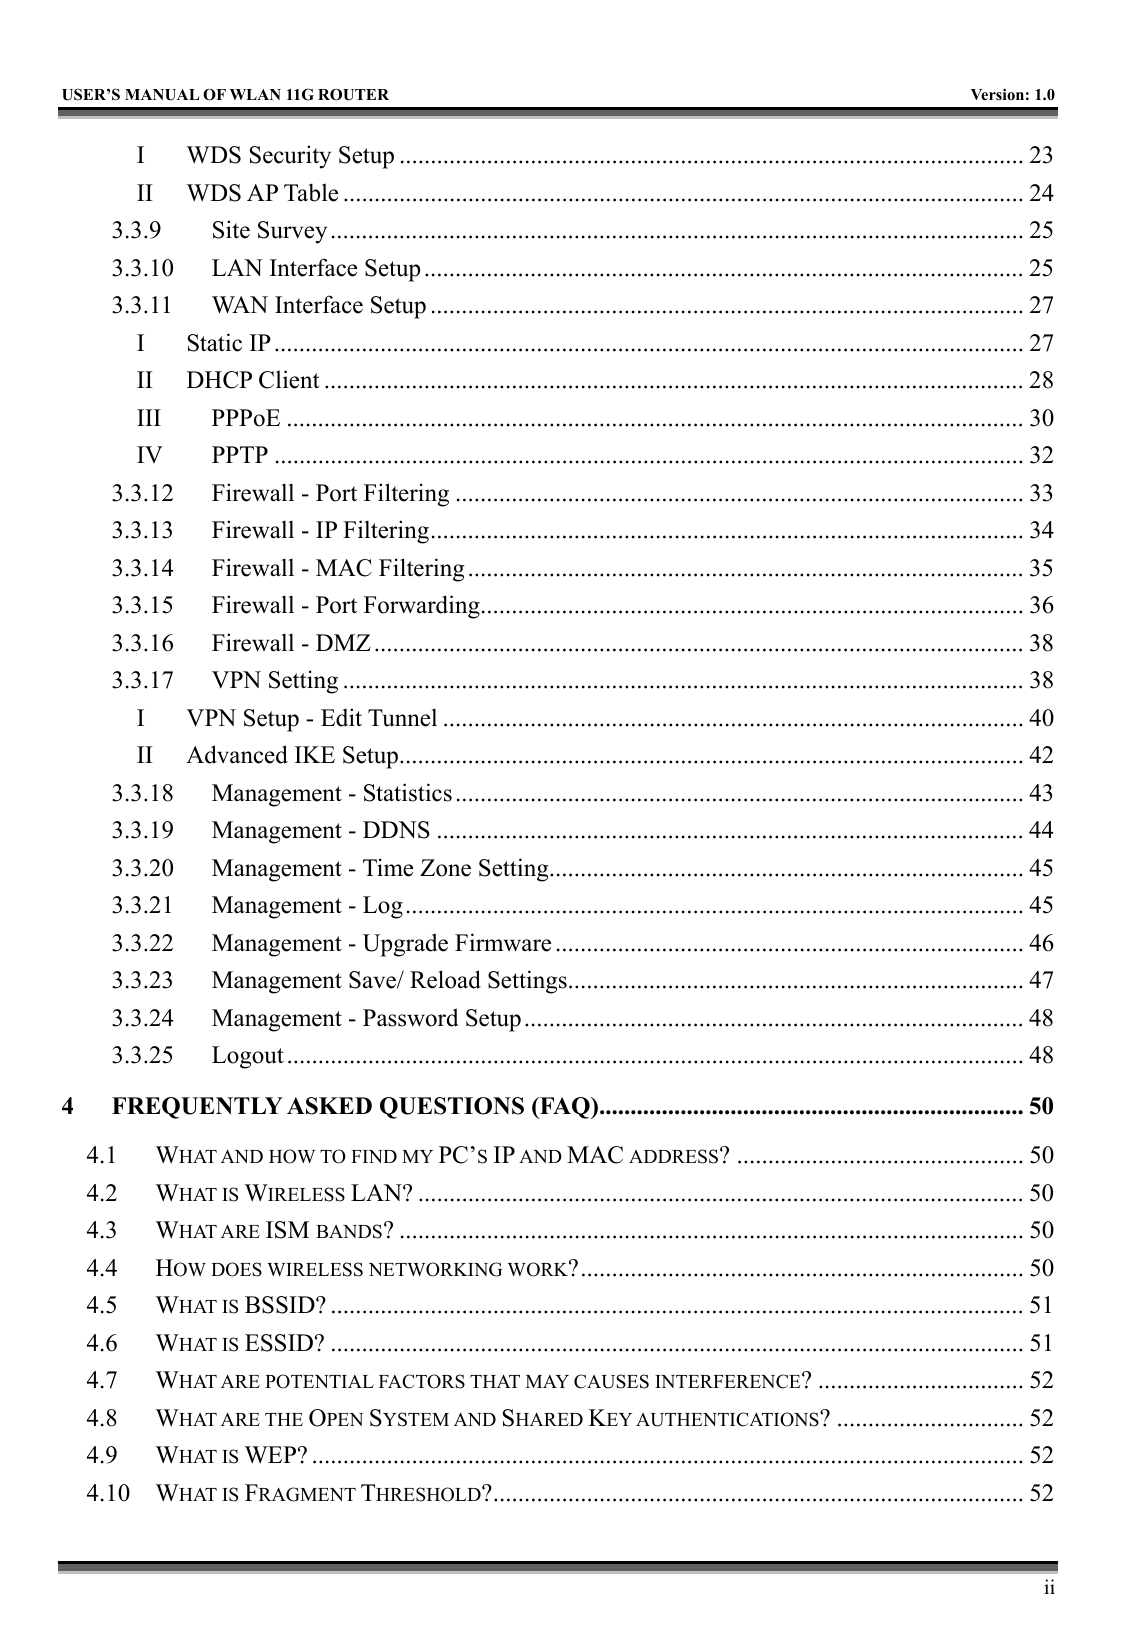   USER’S MANUAL OF WLAN 11G ROUTER    Version: 1.0     ii I WDS Security Setup .................................................................................................... 23 II WDS AP Table ............................................................................................................. 24 3.3.9 Site Survey ............................................................................................................... 25 3.3.10  LAN Interface Setup................................................................................................ 25 3.3.11  WAN Interface Setup ............................................................................................... 27 I Static IP........................................................................................................................ 27 II DHCP Client ................................................................................................................ 28 III PPPoE ...................................................................................................................... 30 IV PPTP ........................................................................................................................ 32 3.3.12  Firewall - Port Filtering ........................................................................................... 33 3.3.13  Firewall - IP Filtering............................................................................................... 34 3.3.14  Firewall - MAC Filtering......................................................................................... 35 3.3.15  Firewall - Port Forwarding....................................................................................... 36 3.3.16  Firewall - DMZ........................................................................................................ 38 3.3.17 VPN Setting ............................................................................................................. 38 I  VPN Setup - Edit Tunnel ............................................................................................. 40 II  Advanced IKE Setup.................................................................................................... 42 3.3.18  Management - Statistics........................................................................................... 43 3.3.19  Management - DDNS .............................................................................................. 44 3.3.20  Management - Time Zone Setting............................................................................ 45 3.3.21  Management - Log................................................................................................... 45 3.3.22  Management - Upgrade Firmware........................................................................... 46 3.3.23  Management Save/ Reload Settings......................................................................... 47 3.3.24  Management - Password Setup................................................................................ 48 3.3.25 Logout...................................................................................................................... 48 4 FREQUENTLY ASKED QUESTIONS (FAQ).................................................................... 50 4.1 WHAT AND HOW TO FIND MY PC’S IP AND MAC ADDRESS? .............................................. 50 4.2 WHAT IS WIRELESS LAN? ................................................................................................. 50 4.3 WHAT ARE ISM BANDS? .................................................................................................... 50 4.4 HOW DOES WIRELESS NETWORKING WORK?....................................................................... 50 4.5 WHAT IS BSSID? ............................................................................................................... 51 4.6 WHAT IS ESSID? ............................................................................................................... 51 4.7 WHAT ARE POTENTIAL FACTORS THAT MAY CAUSES INTERFERENCE? ................................. 52 4.8 WHAT ARE THE OPEN SYSTEM AND SHARED KEY AUTHENTICATIONS? .............................. 52 4.9 WHAT IS WEP? .................................................................................................................. 52 4.10 WHAT IS FRAGMENT THRESHOLD?..................................................................................... 52 